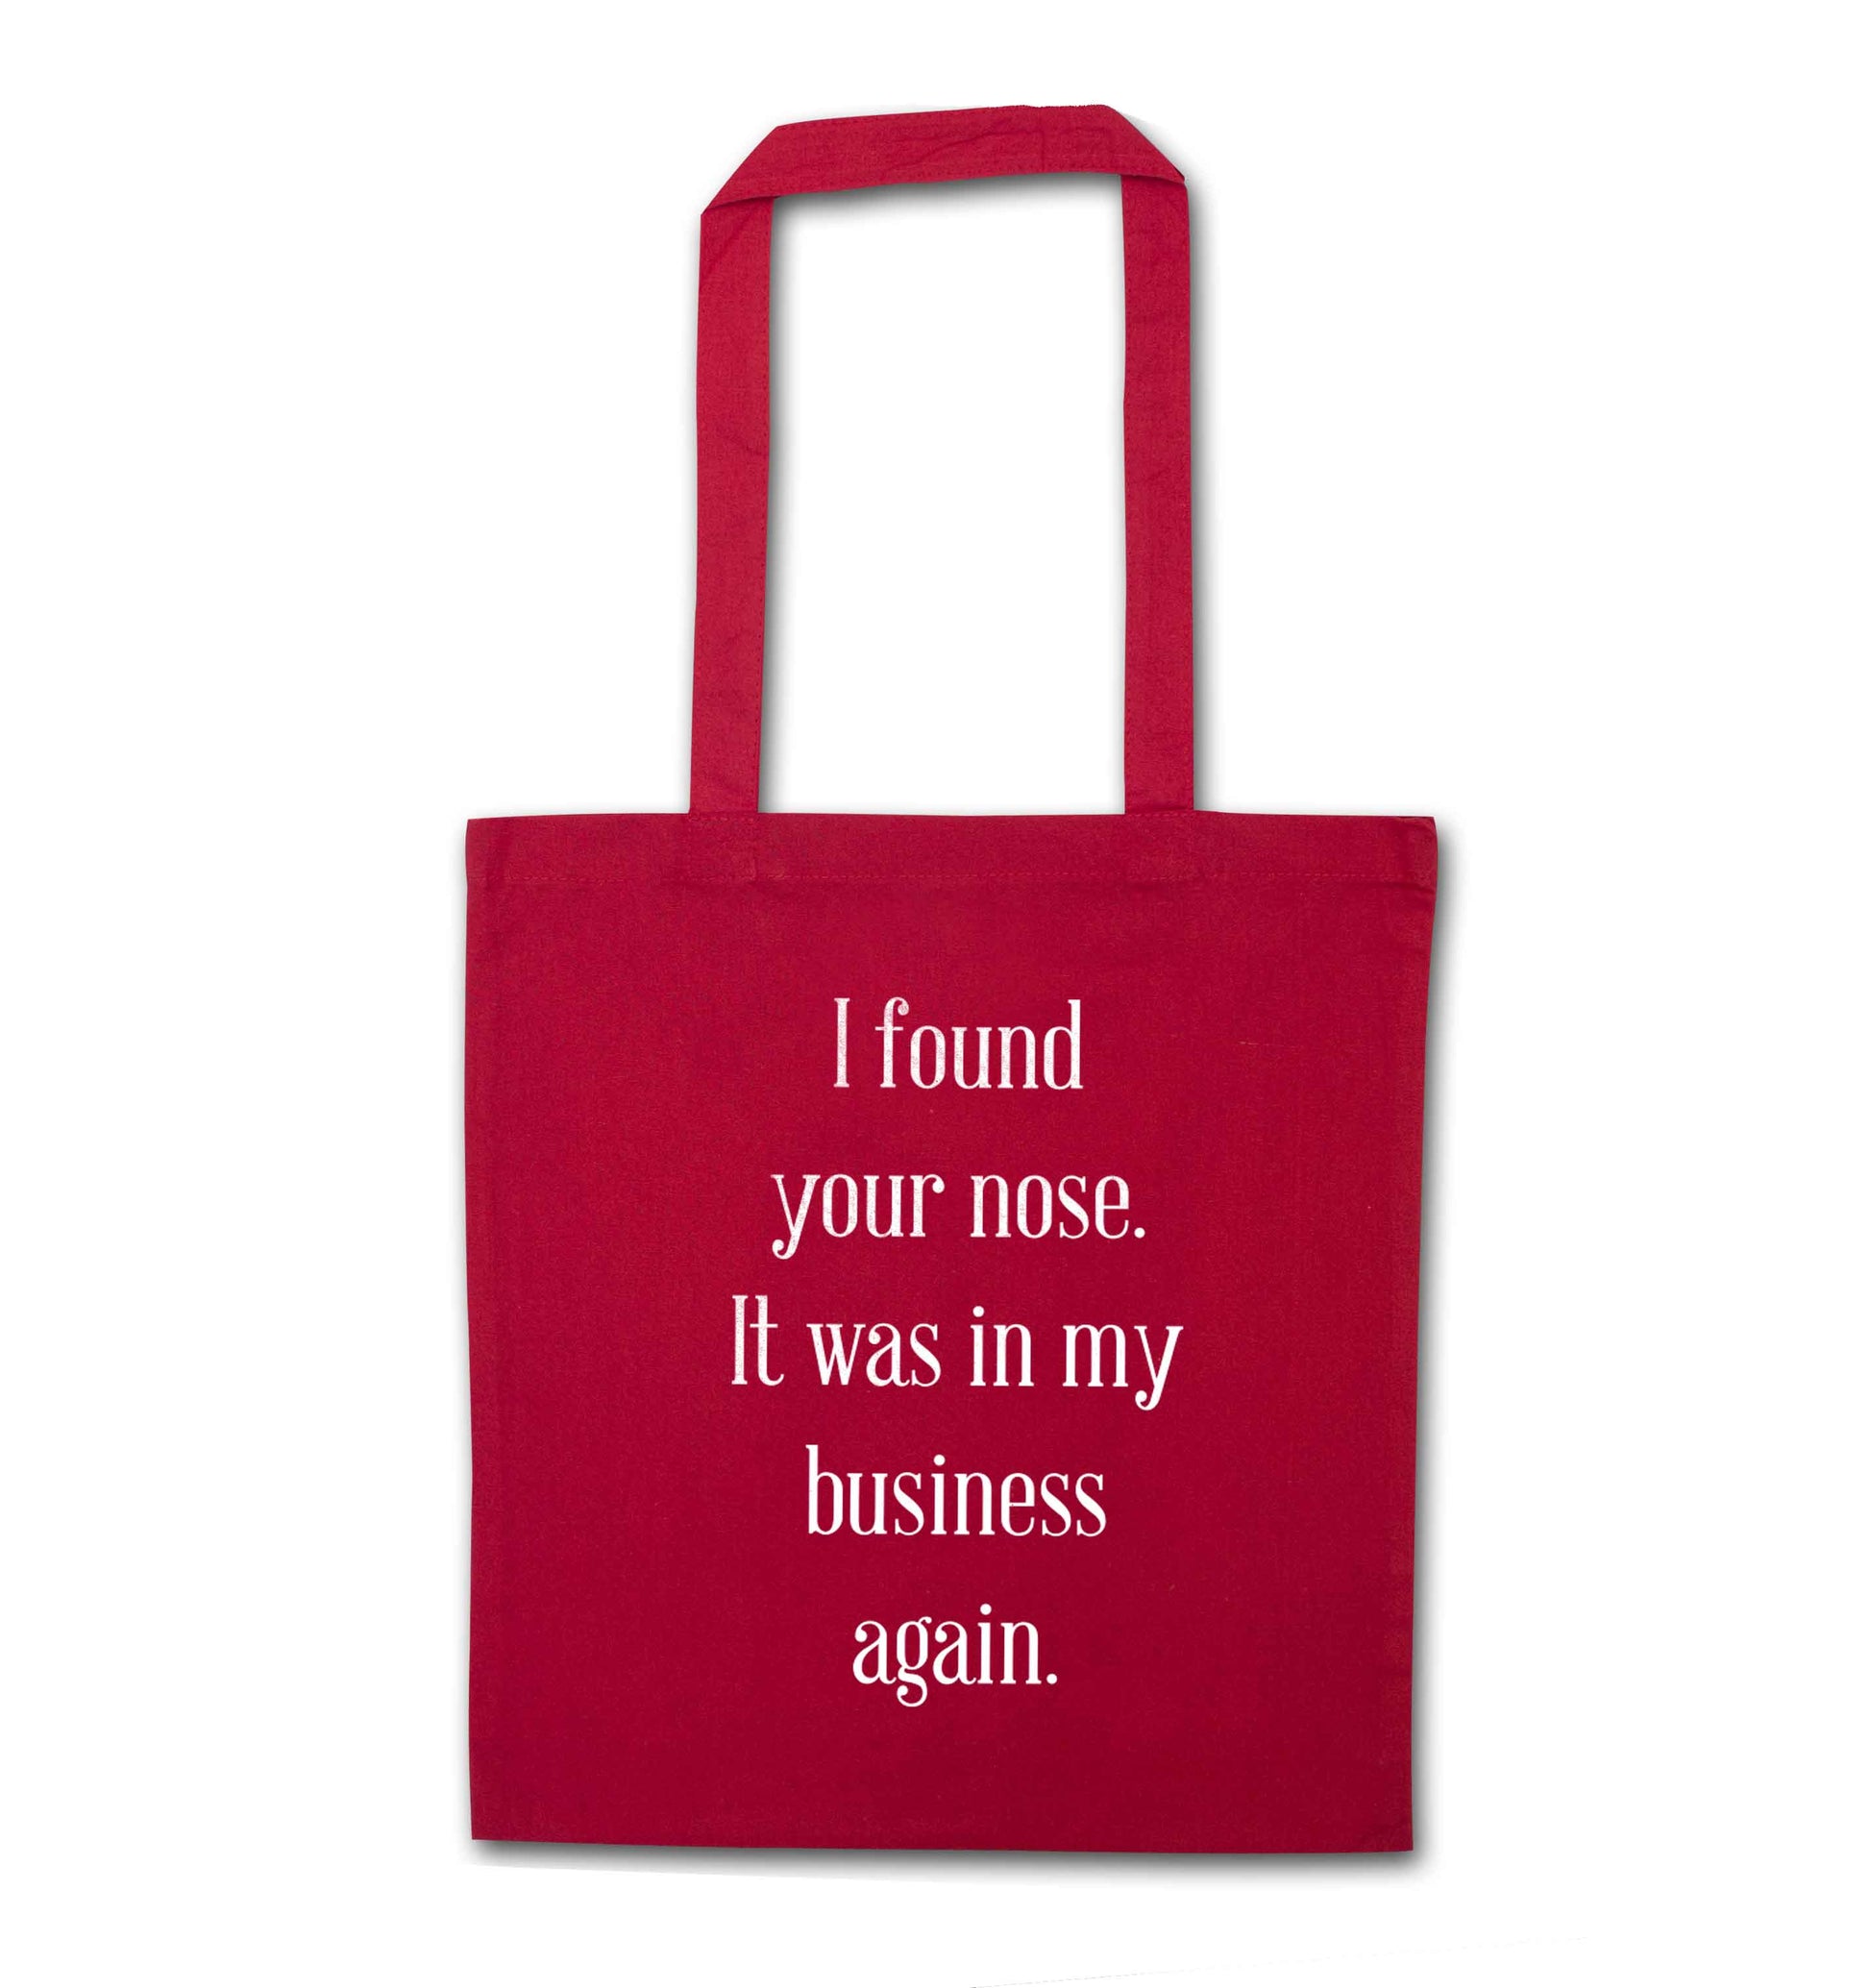 I found your nose it was in my business again red tote bag